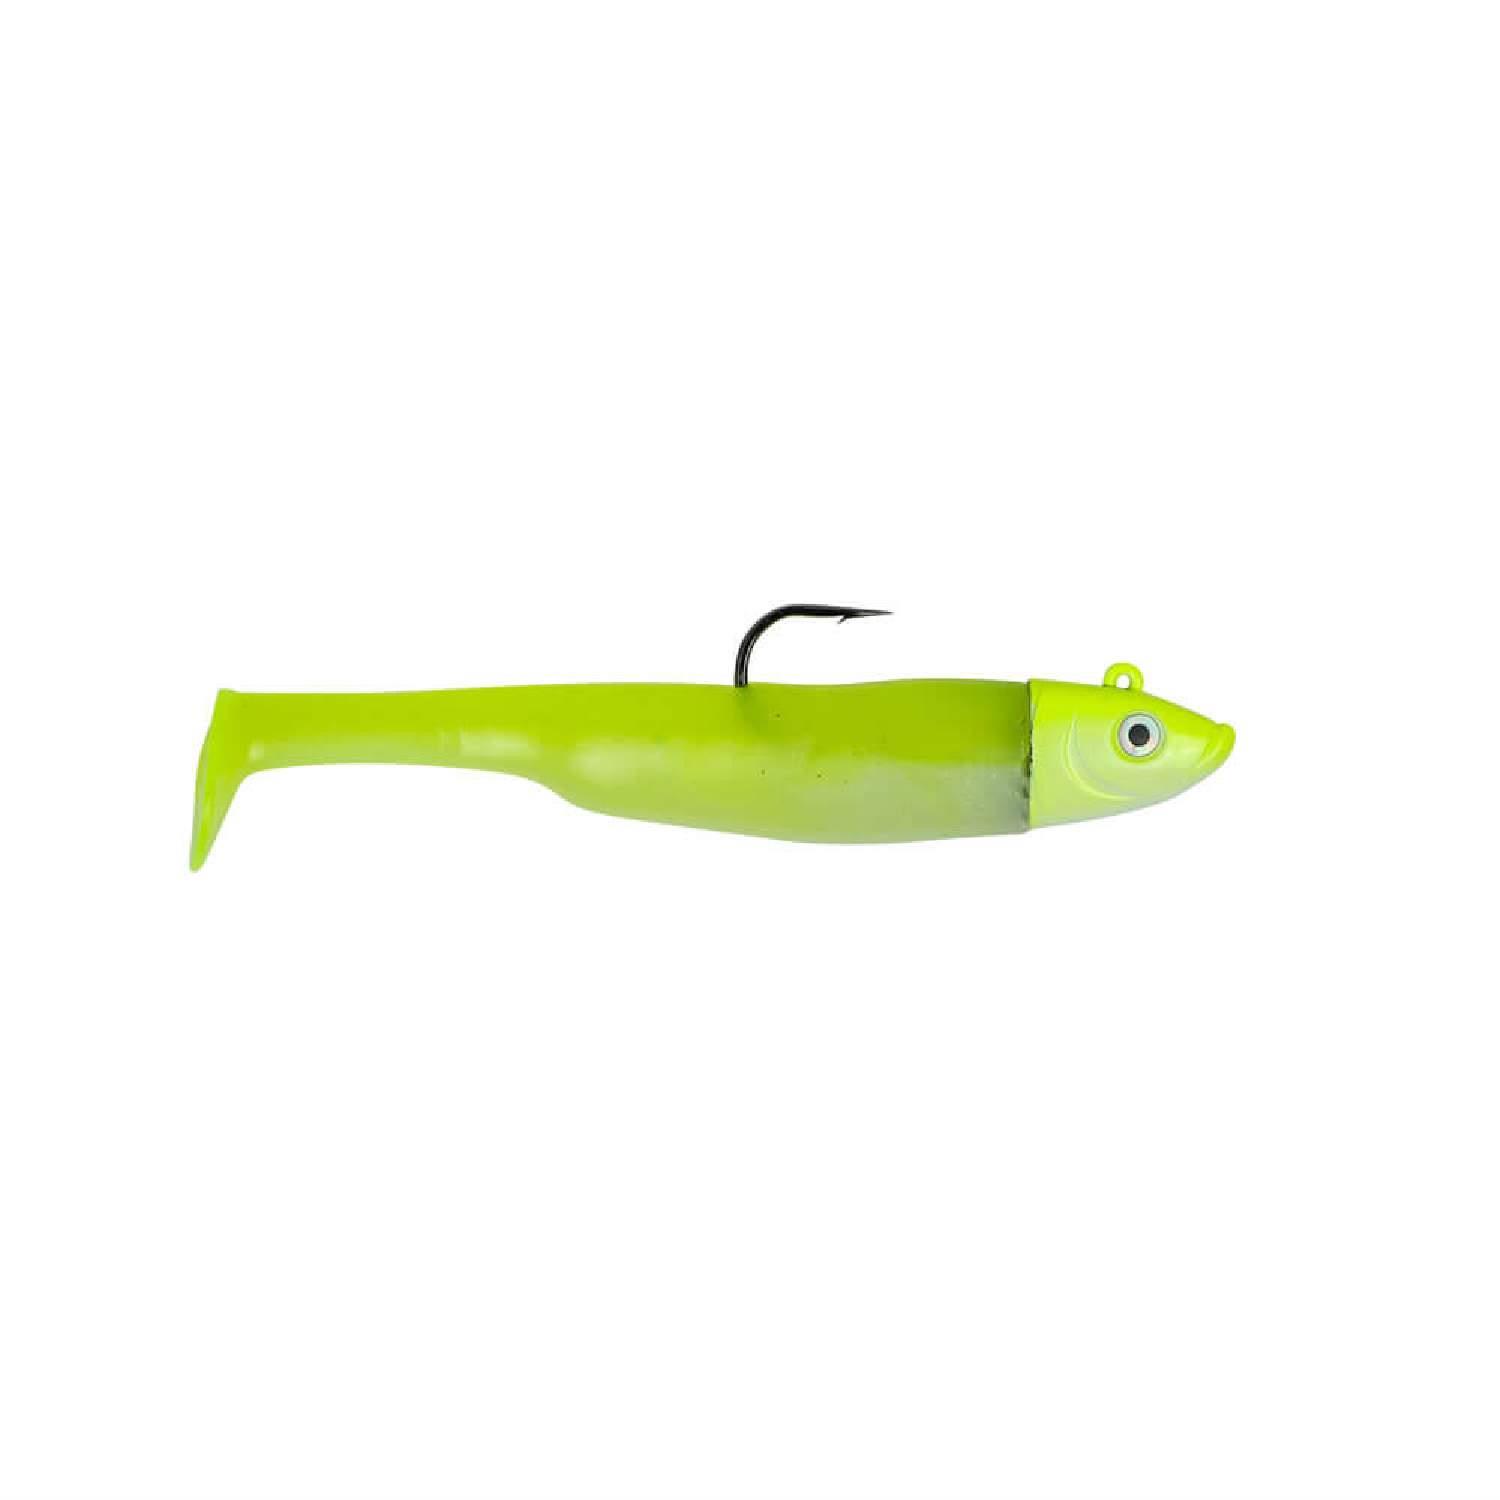 Axia Mighty Eel Kit  Soft Fishing Lure Set With Box